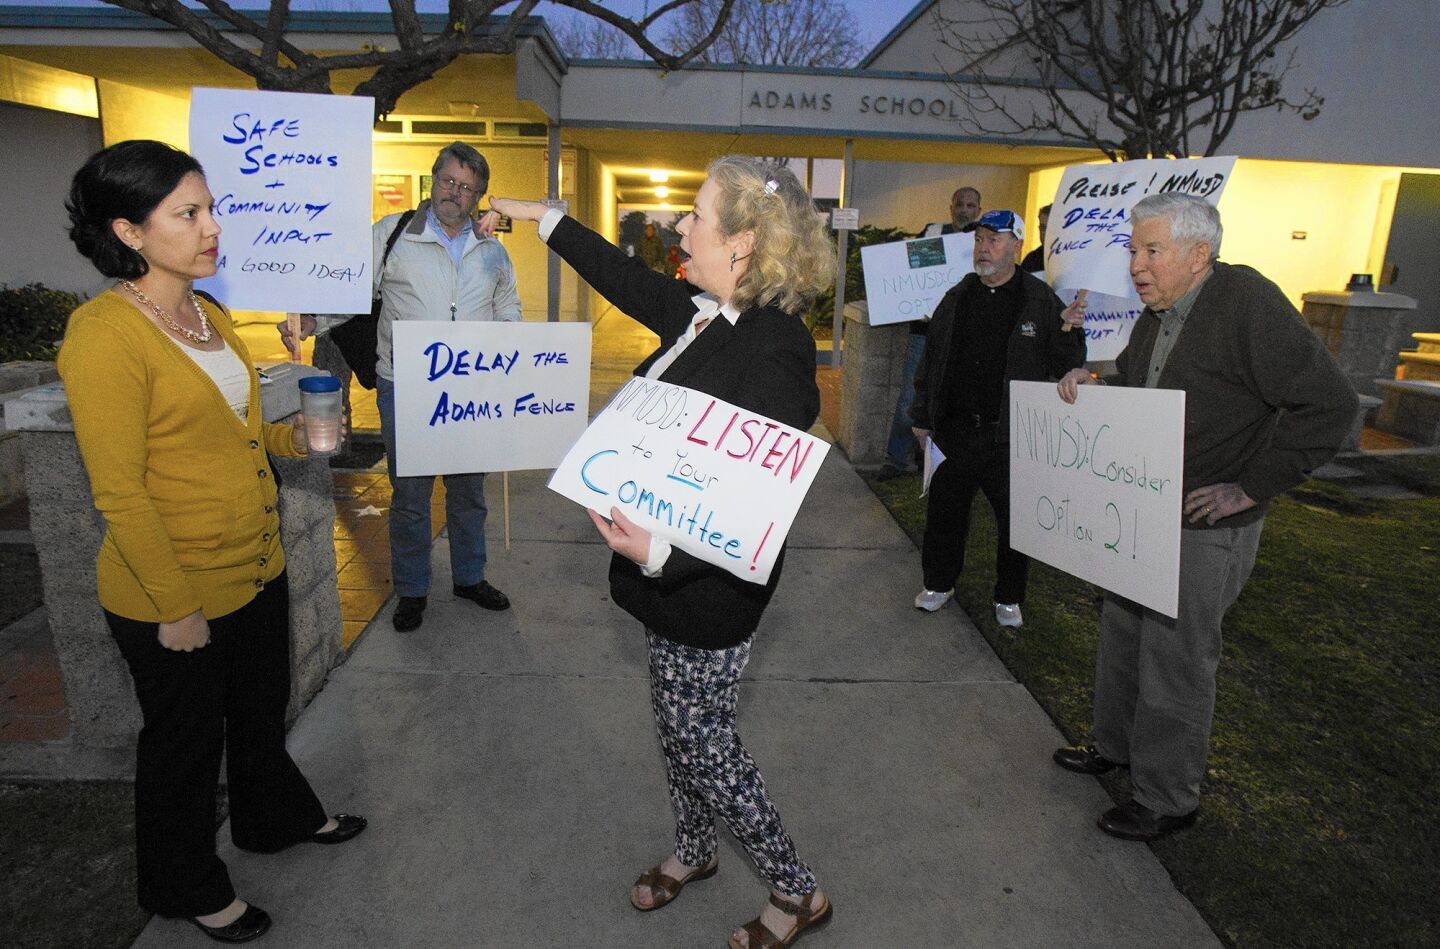 DP No. 10 Kathy Esfahani: Alison Walske, left, a 5th grade teacher at Adams Elementary, and Kathy Esfahani exchange words during a communtiy protest regarding the decision by Newport Mesa Unified School District to put a fence around the school on Feb. 5.